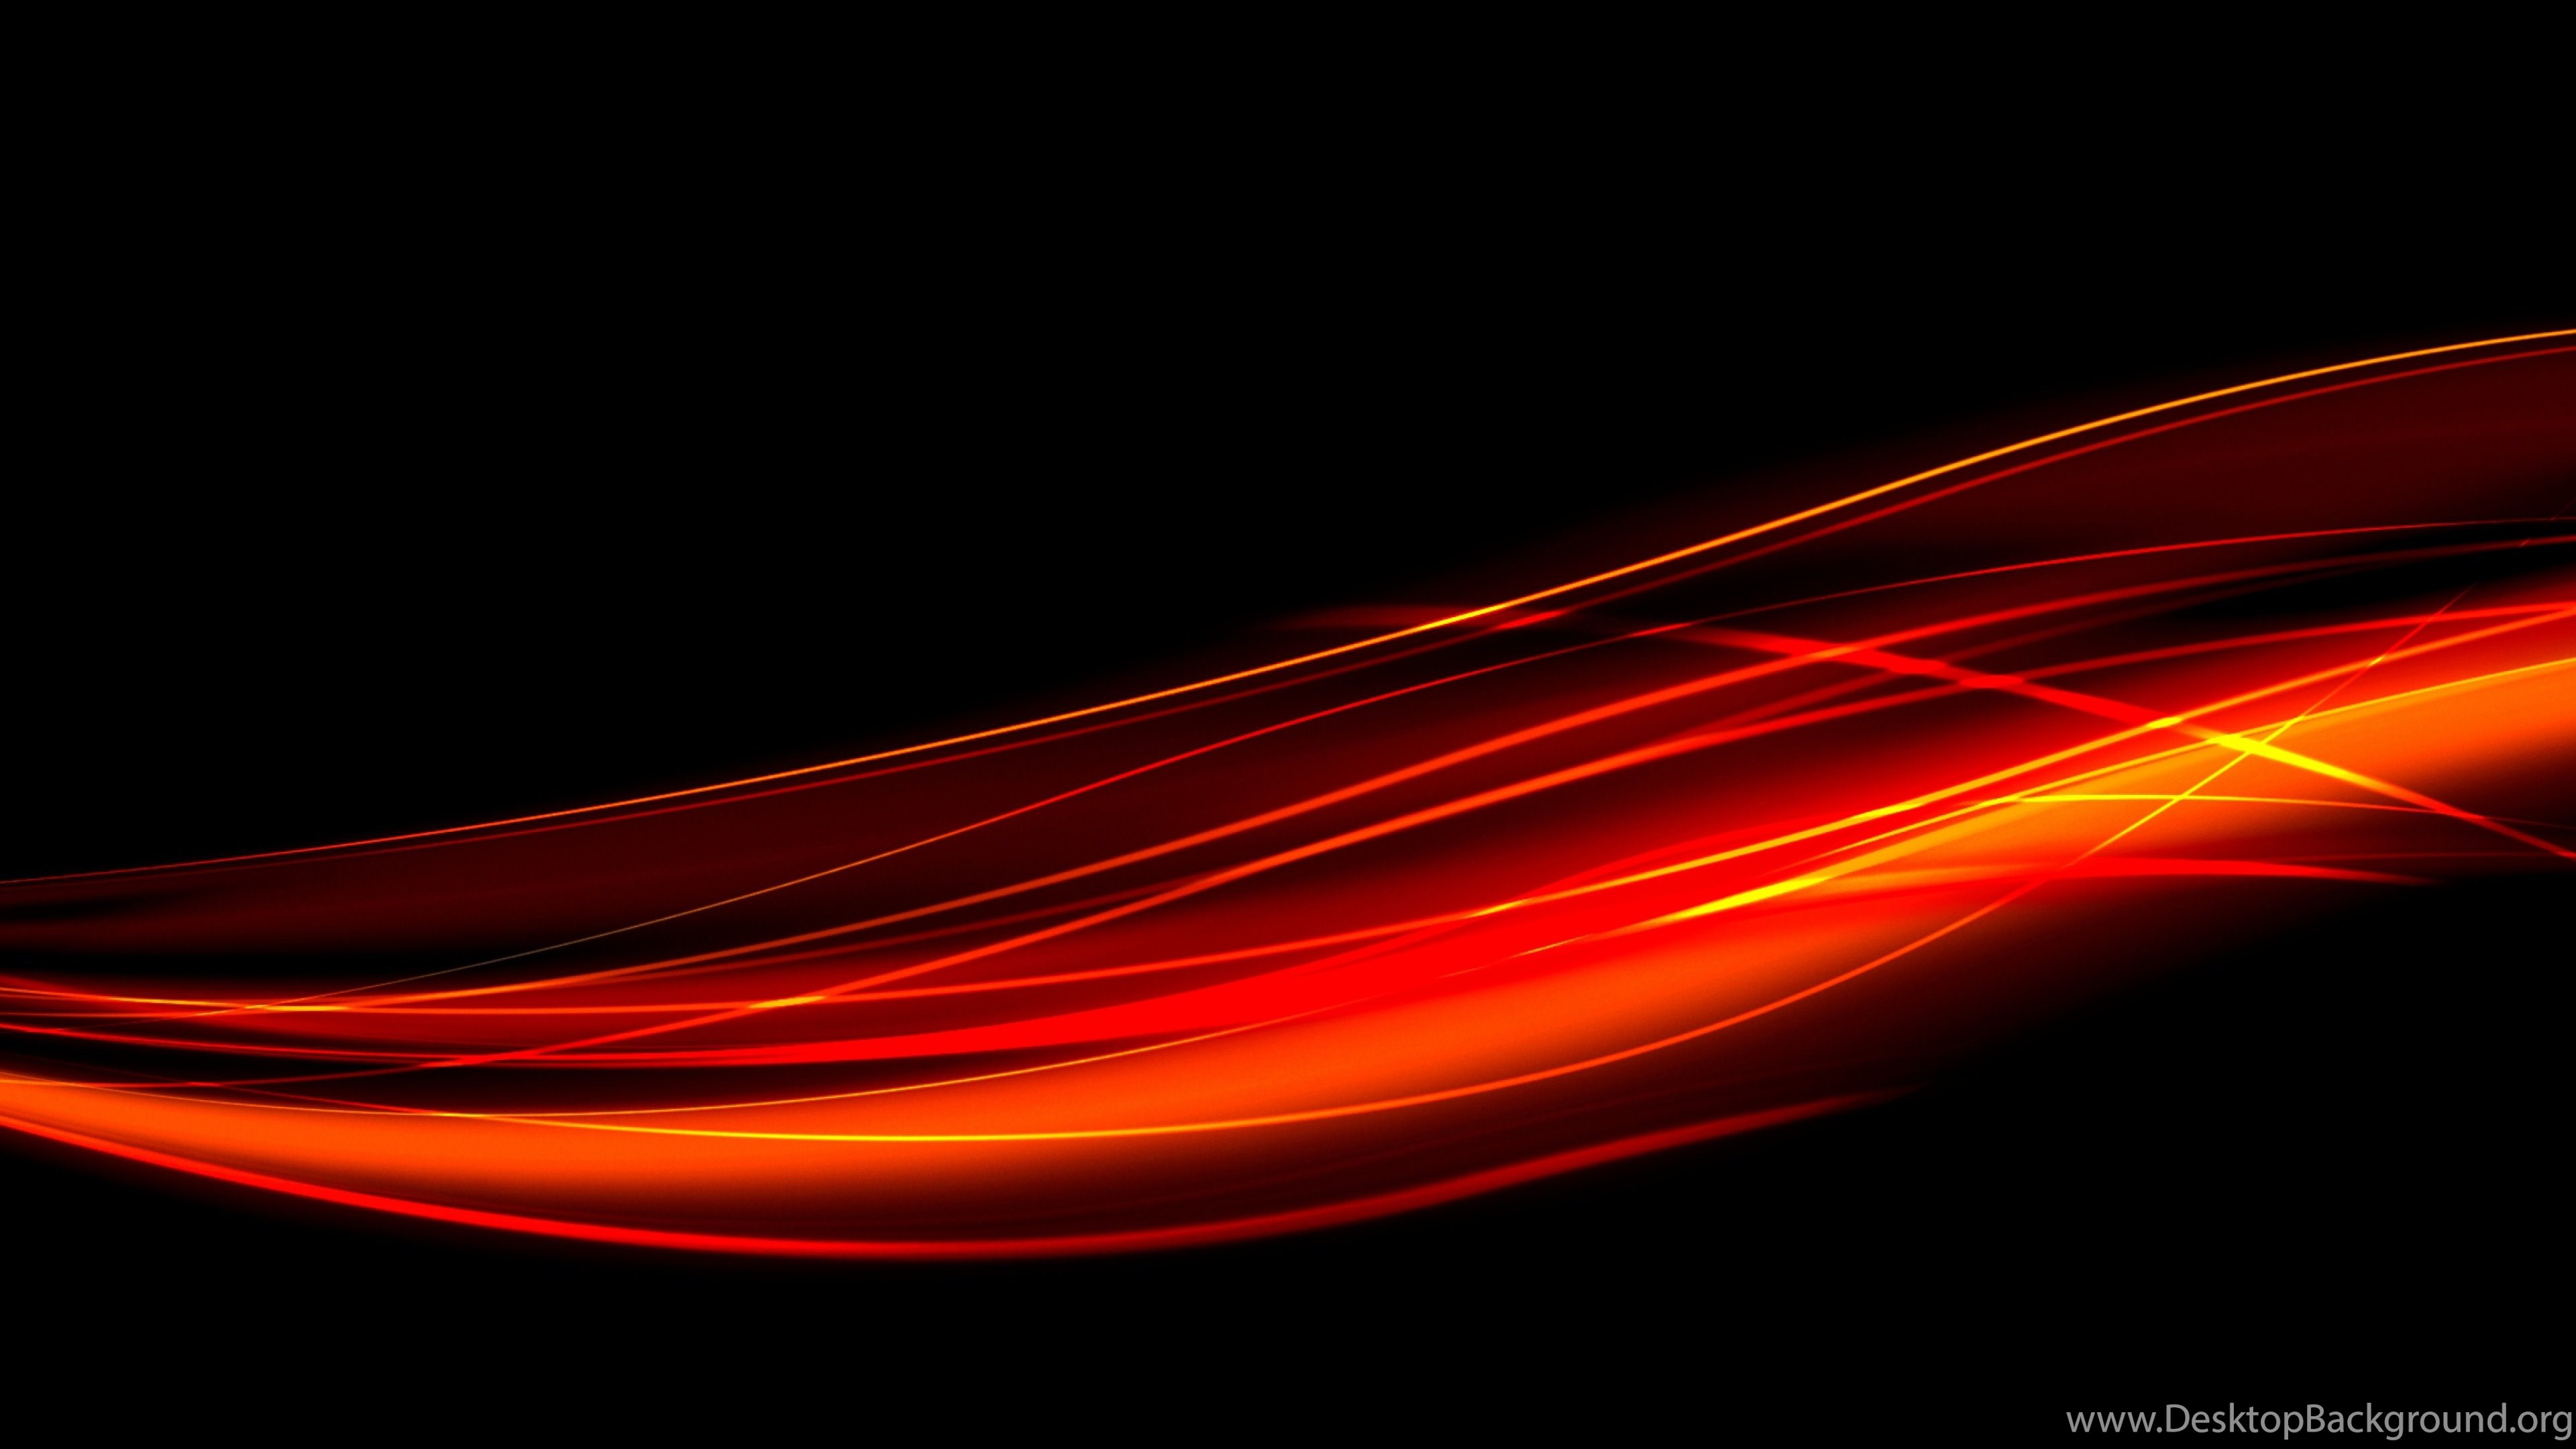  HD  Backgrounds  Black  Red Light  Wave Pattern Wallpapers  